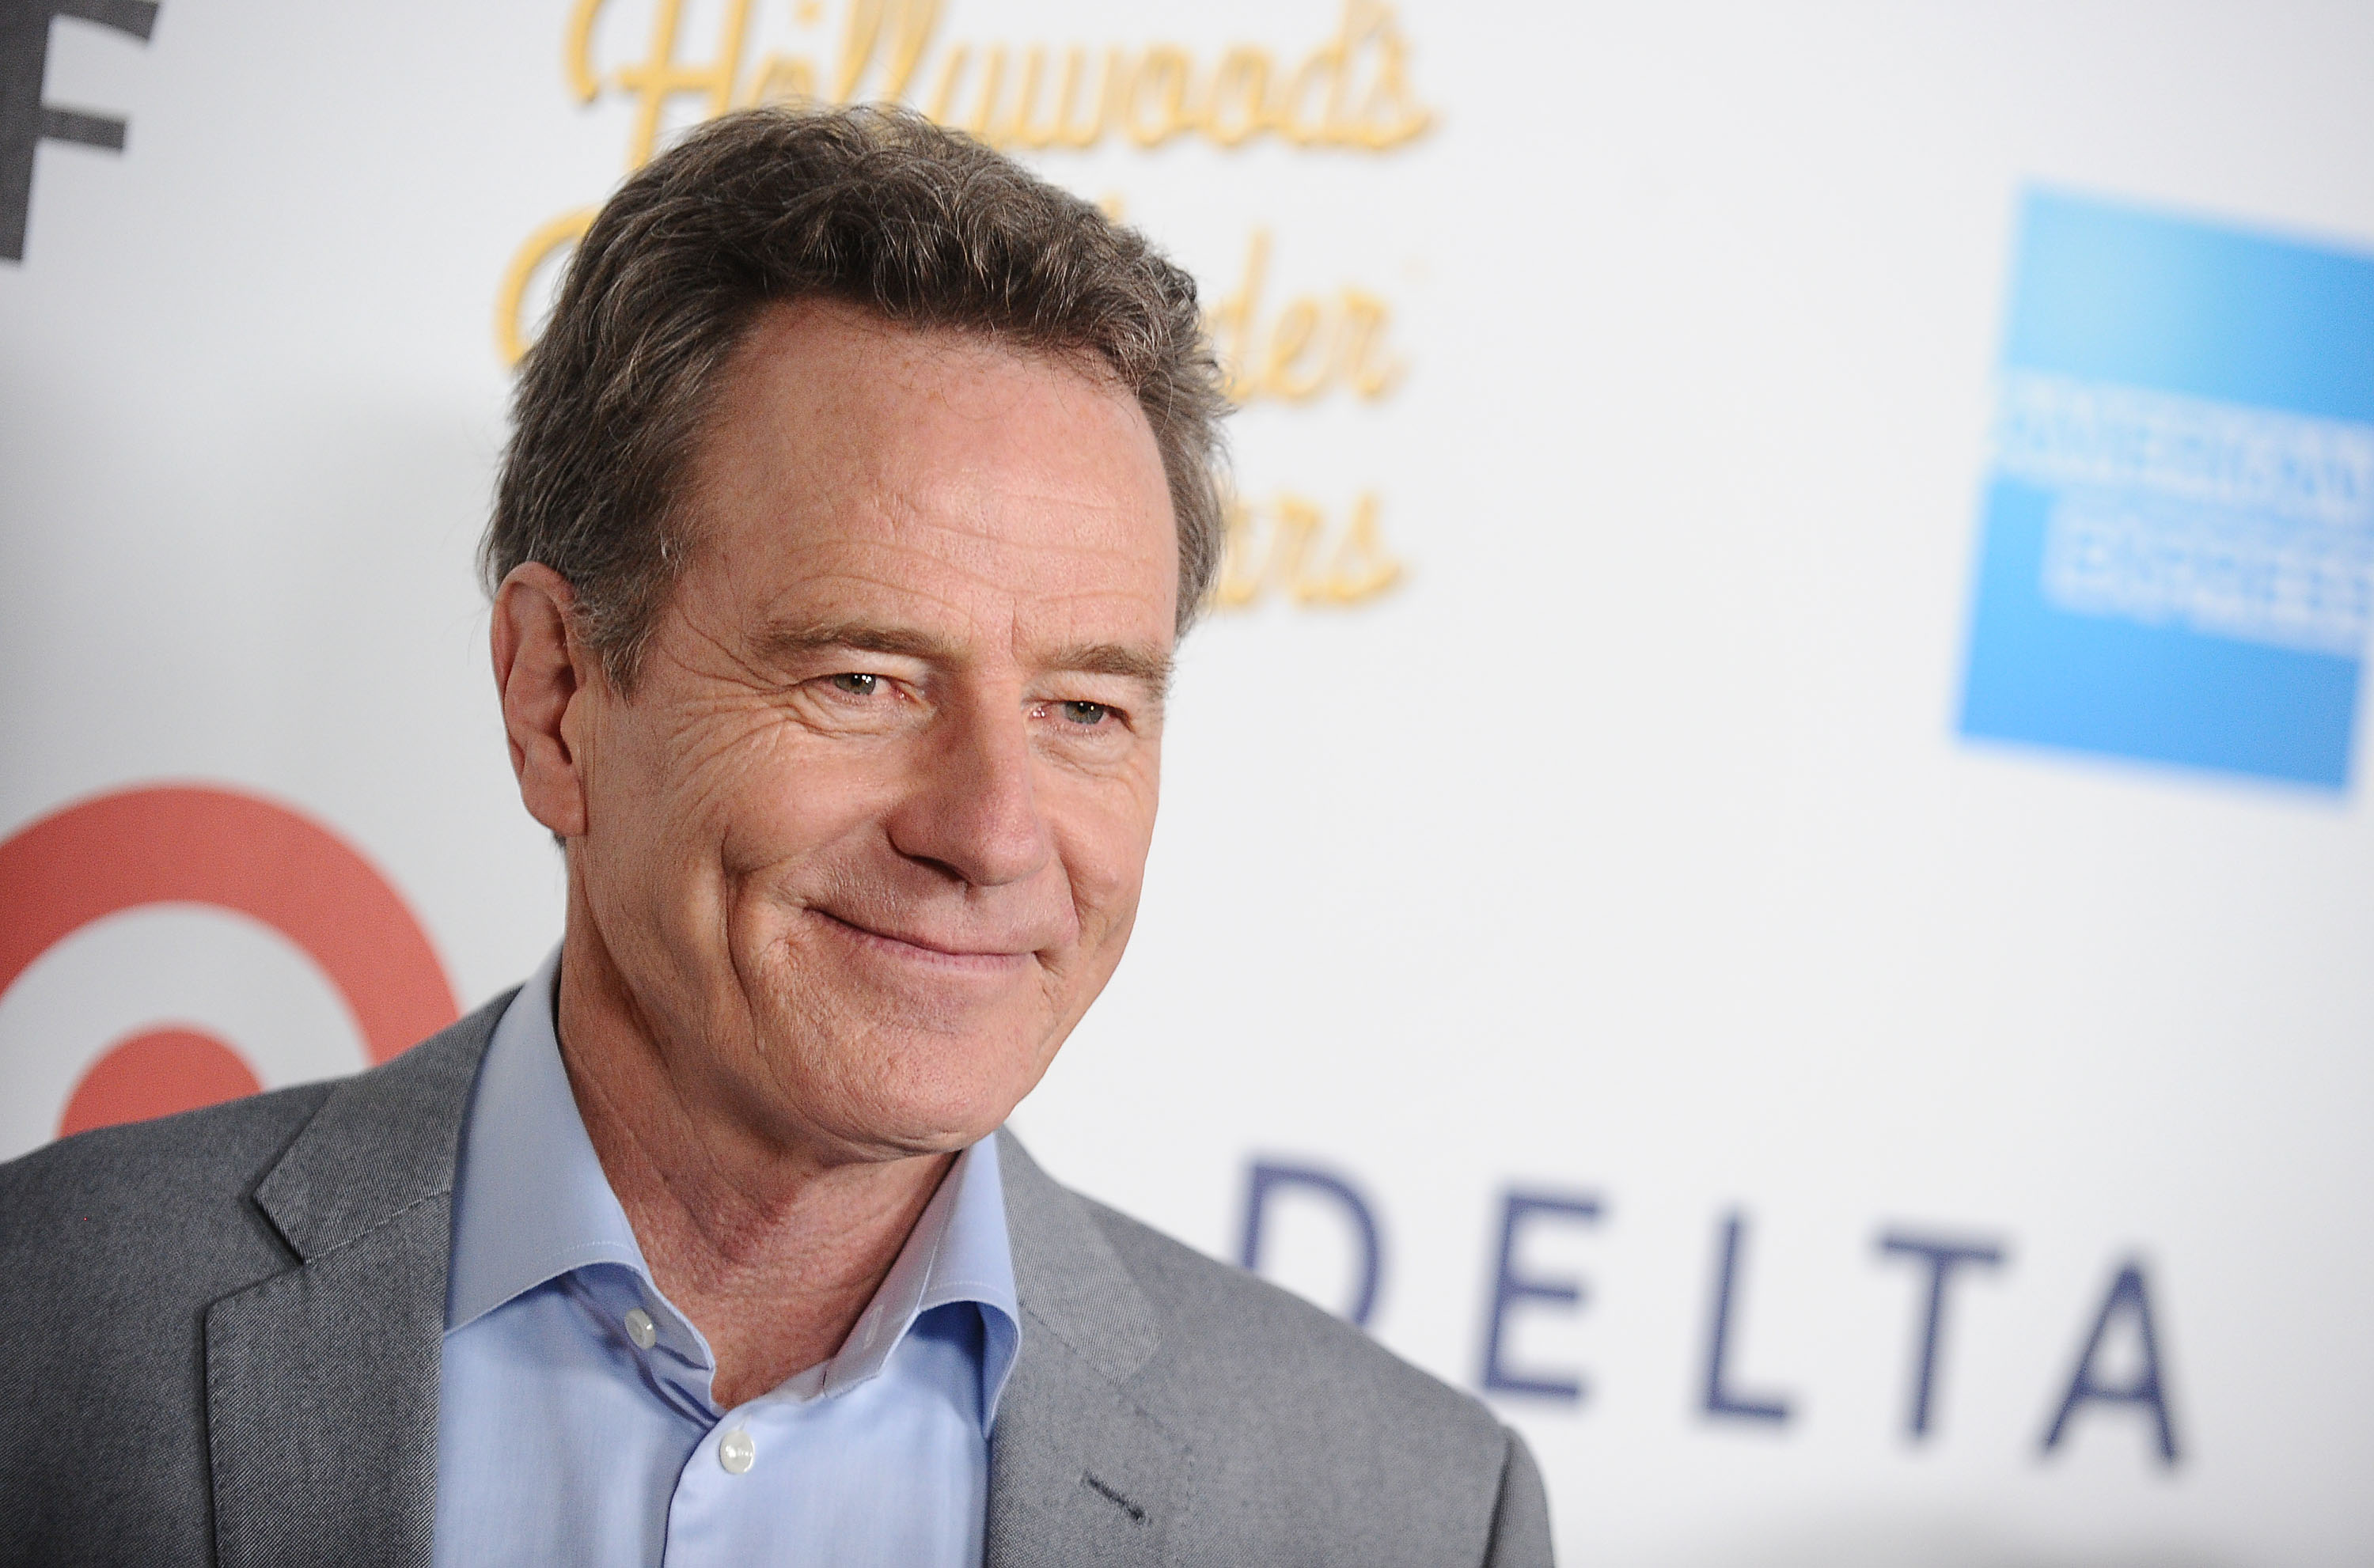 Actor Bryan Cranston attends MPTF's 95th anniversary celebration "Hollywood's Night Under The Stars" on October 1, 2016 in Los Angeles, California. (Jason LaVeris&mdash;FilmMagic/Getty Images)